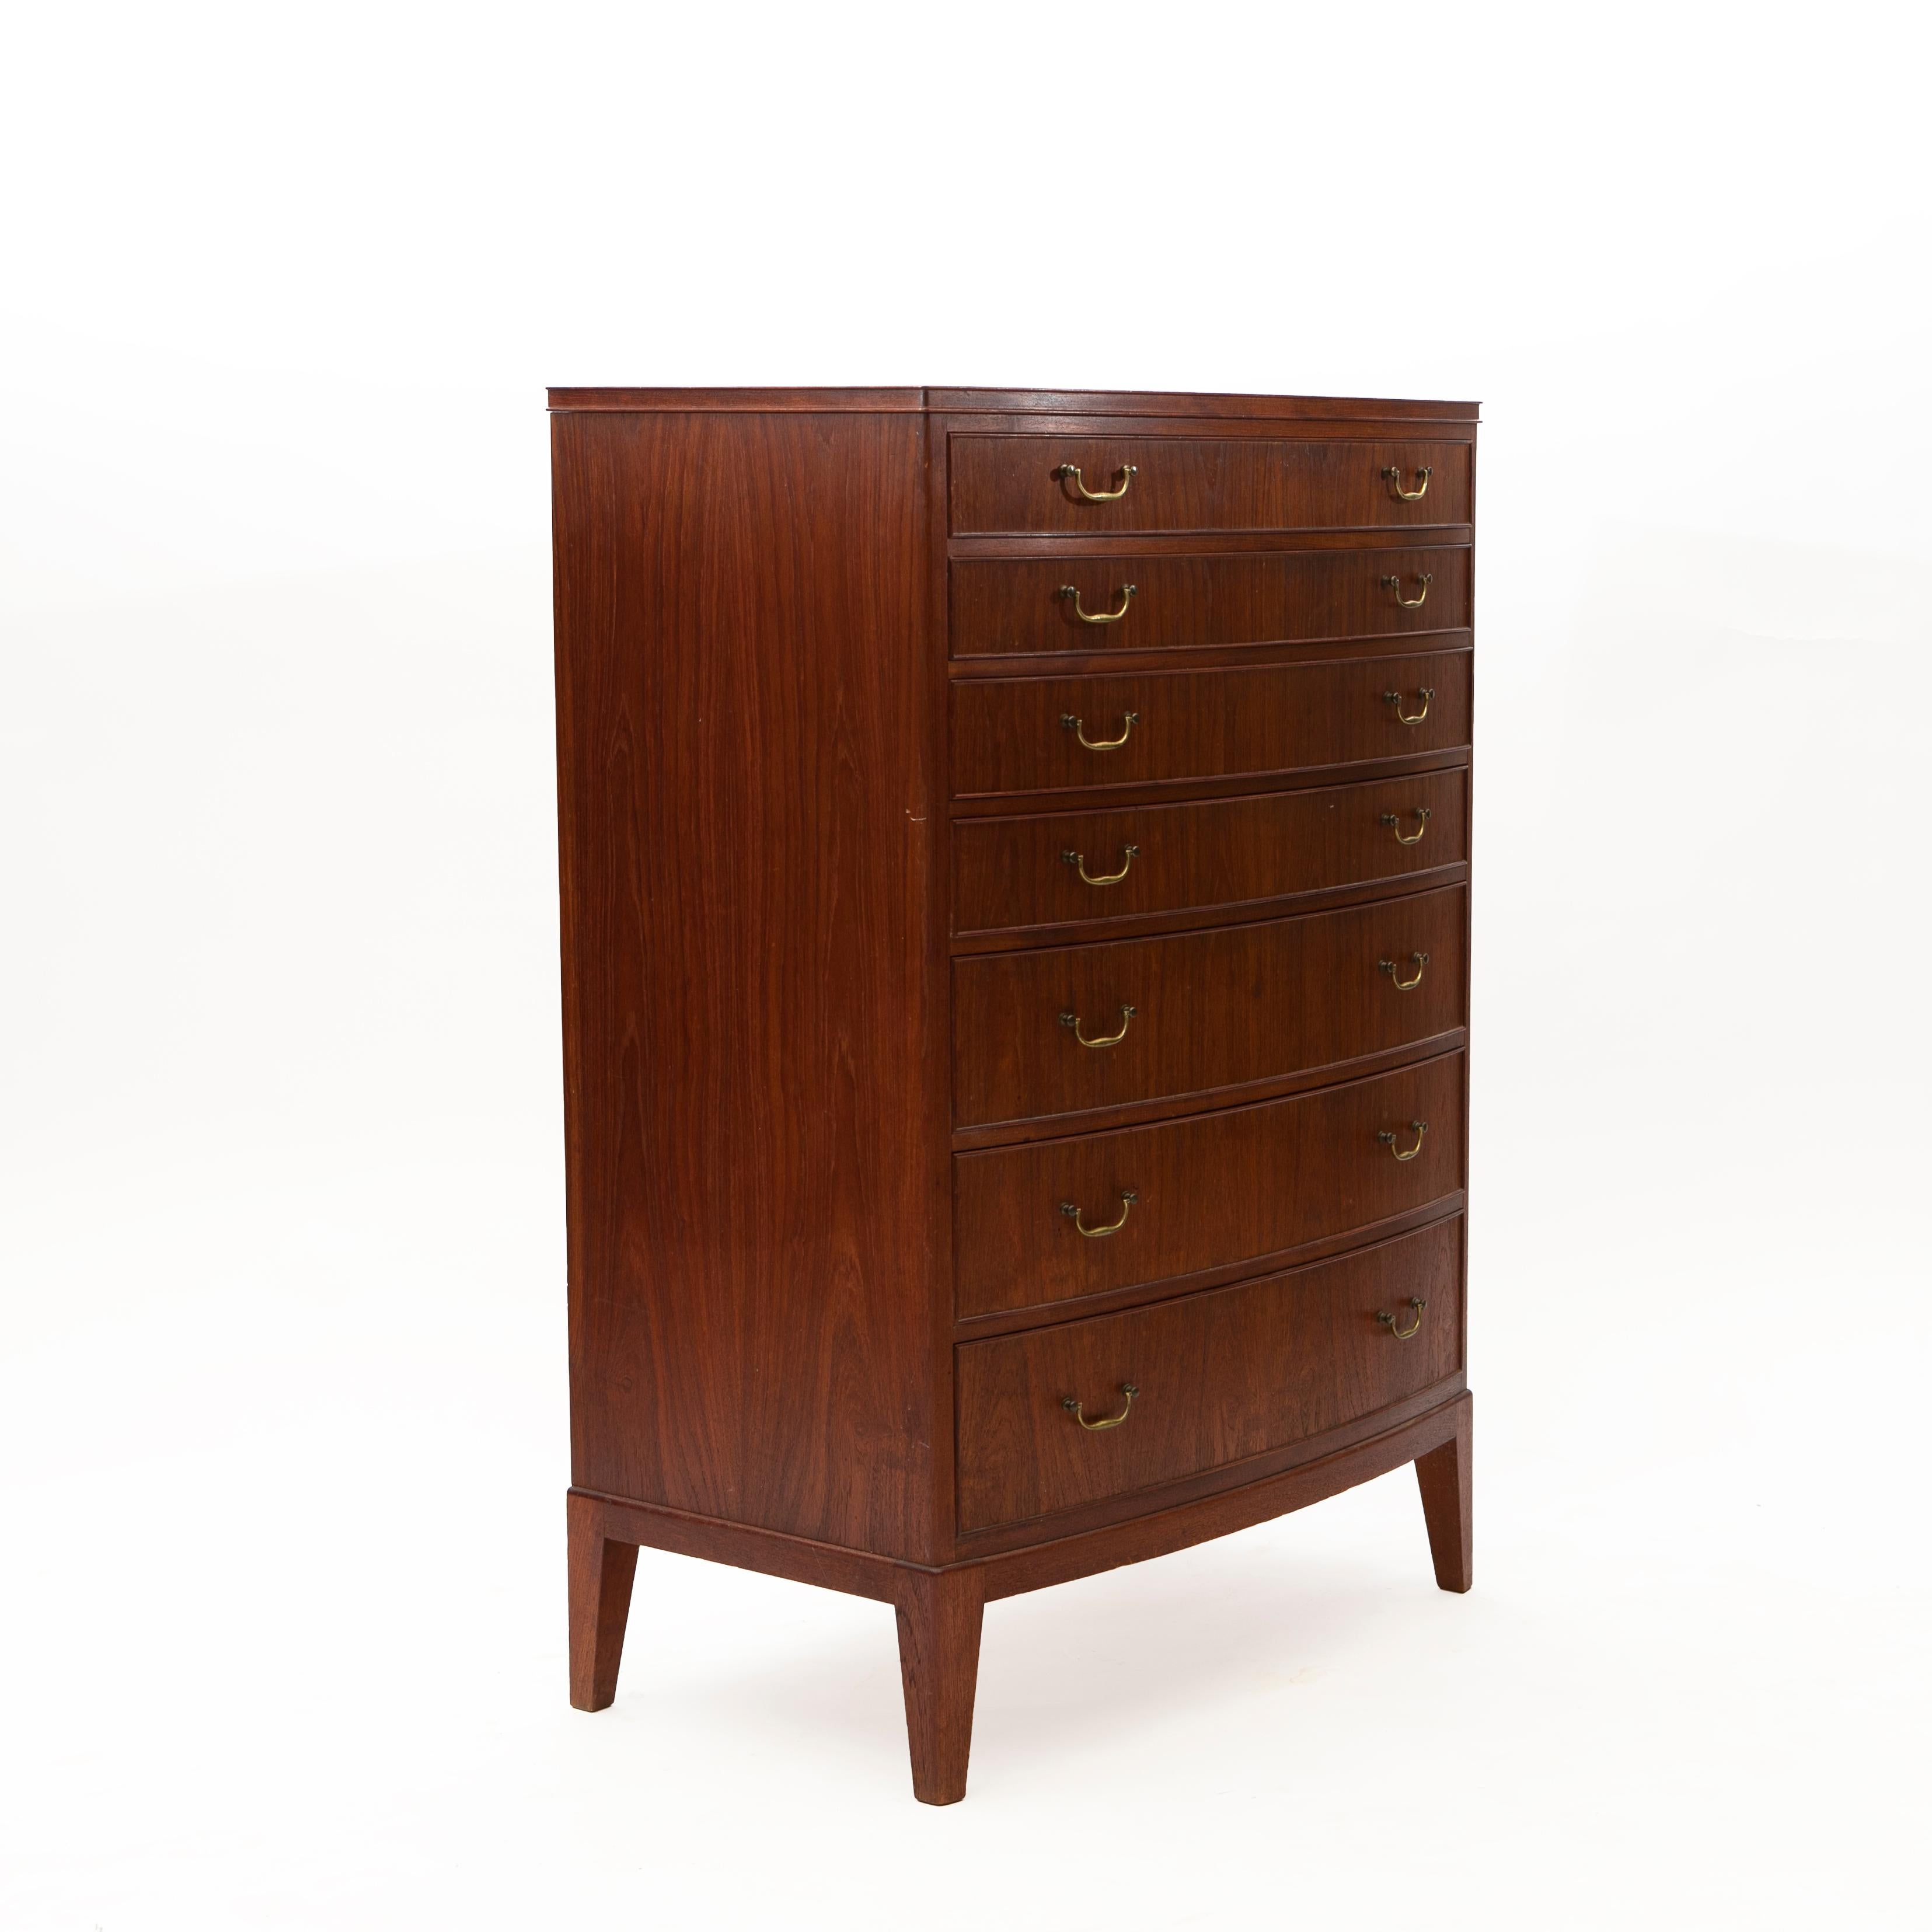 Ole Wanscher (Danish 1903-1985).
Teak wood chest of drawers designed by Ole Wanscher for Illums Bolighus in the 1960s.

The chest of drawers consists of 7 drawers in three different heights with brass handles.

In good original untouched